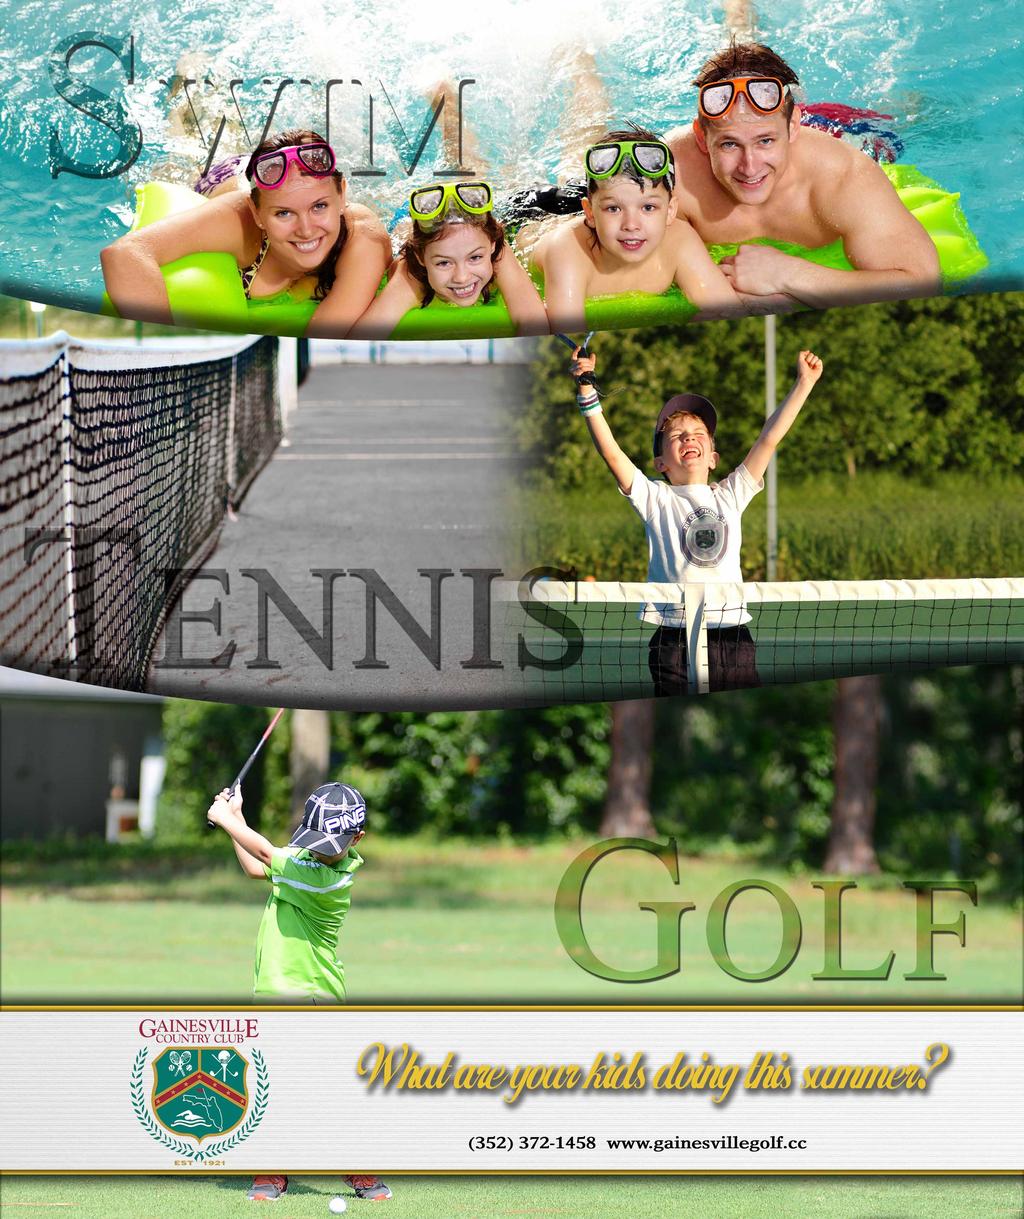 KE Camps comes to Gainesville Country Club! Go to www.kecamps.